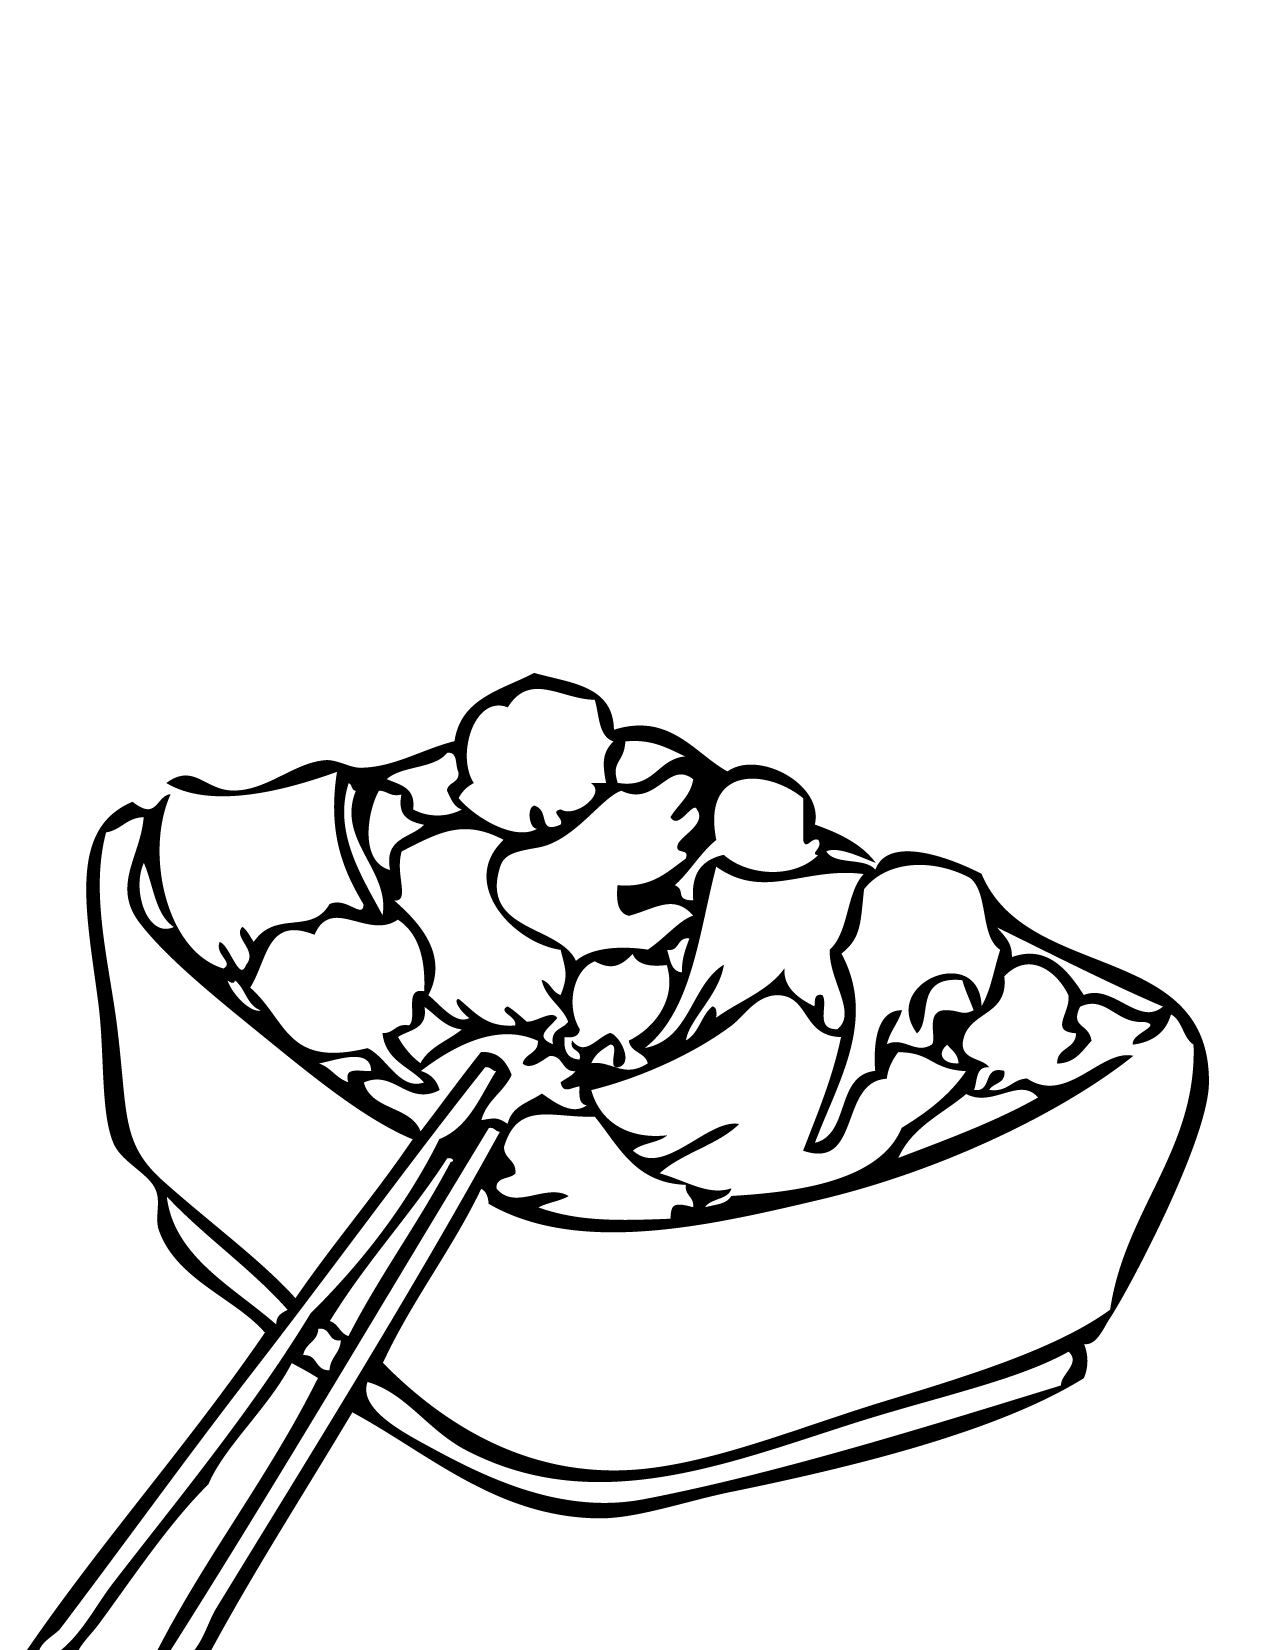 Chinese food clipart black and white